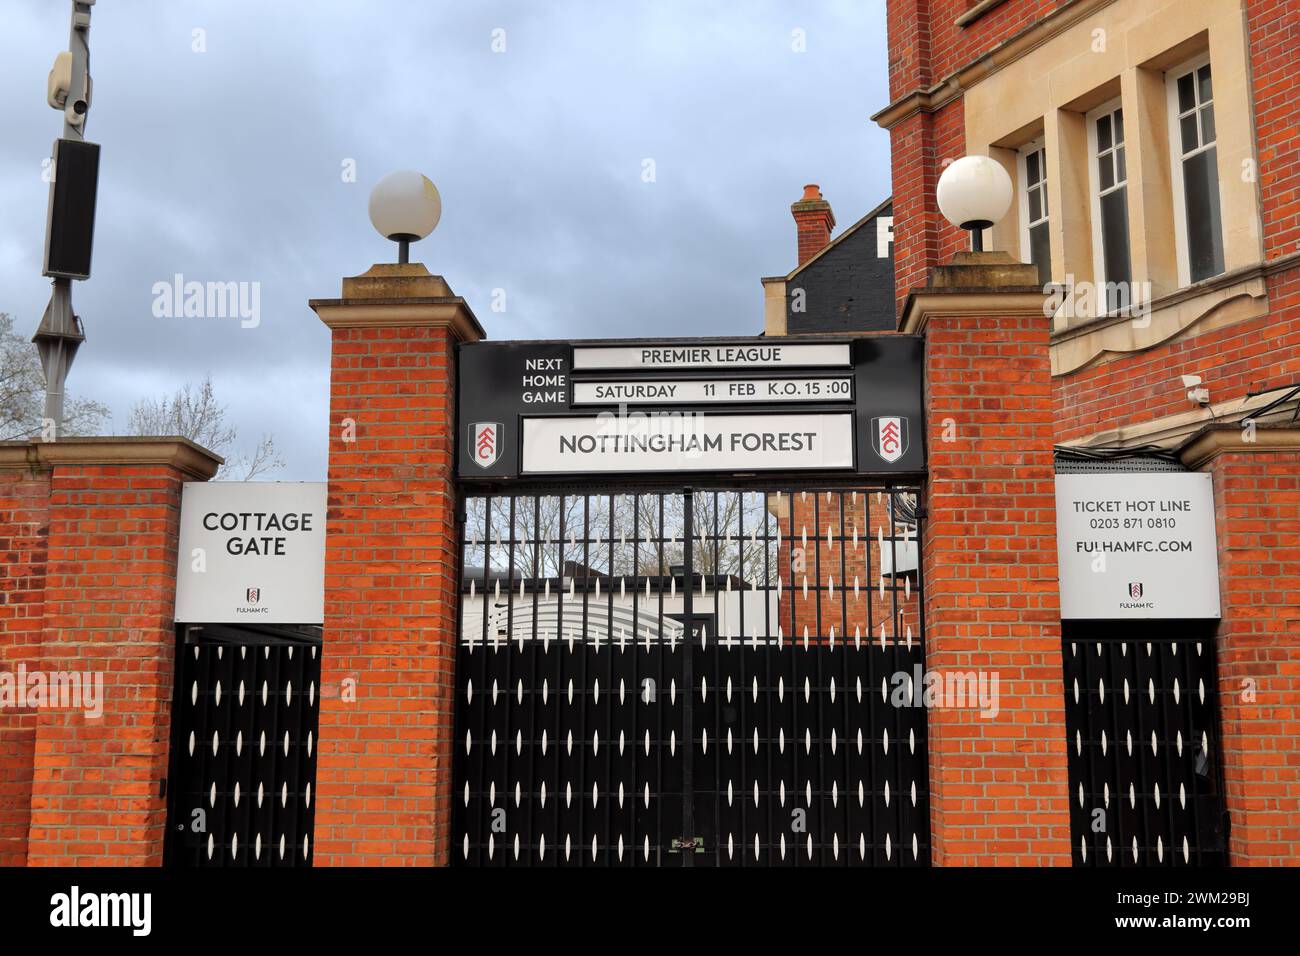 Gates of Craven Cottage football stadium in West London, home of Fulham F.C., advertising match vs. Nottingham Forest Stock Photo